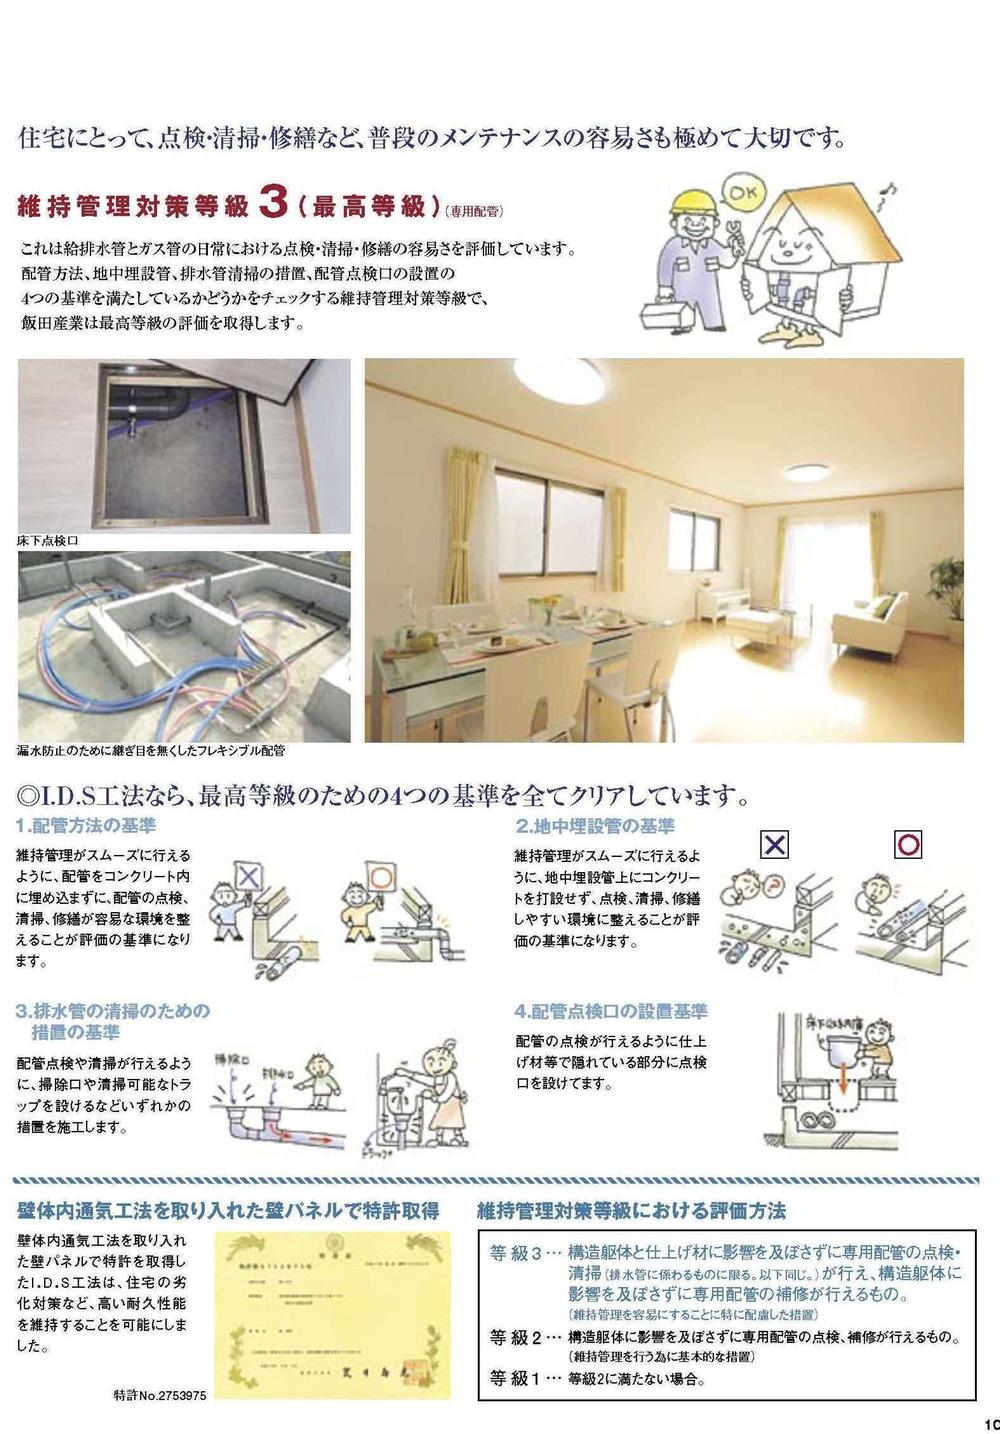 Construction ・ Construction method ・ specification. For housing, inspection ・ cleaning ・ Repair, etc., It is also extremely important ease of daily maintenance. 